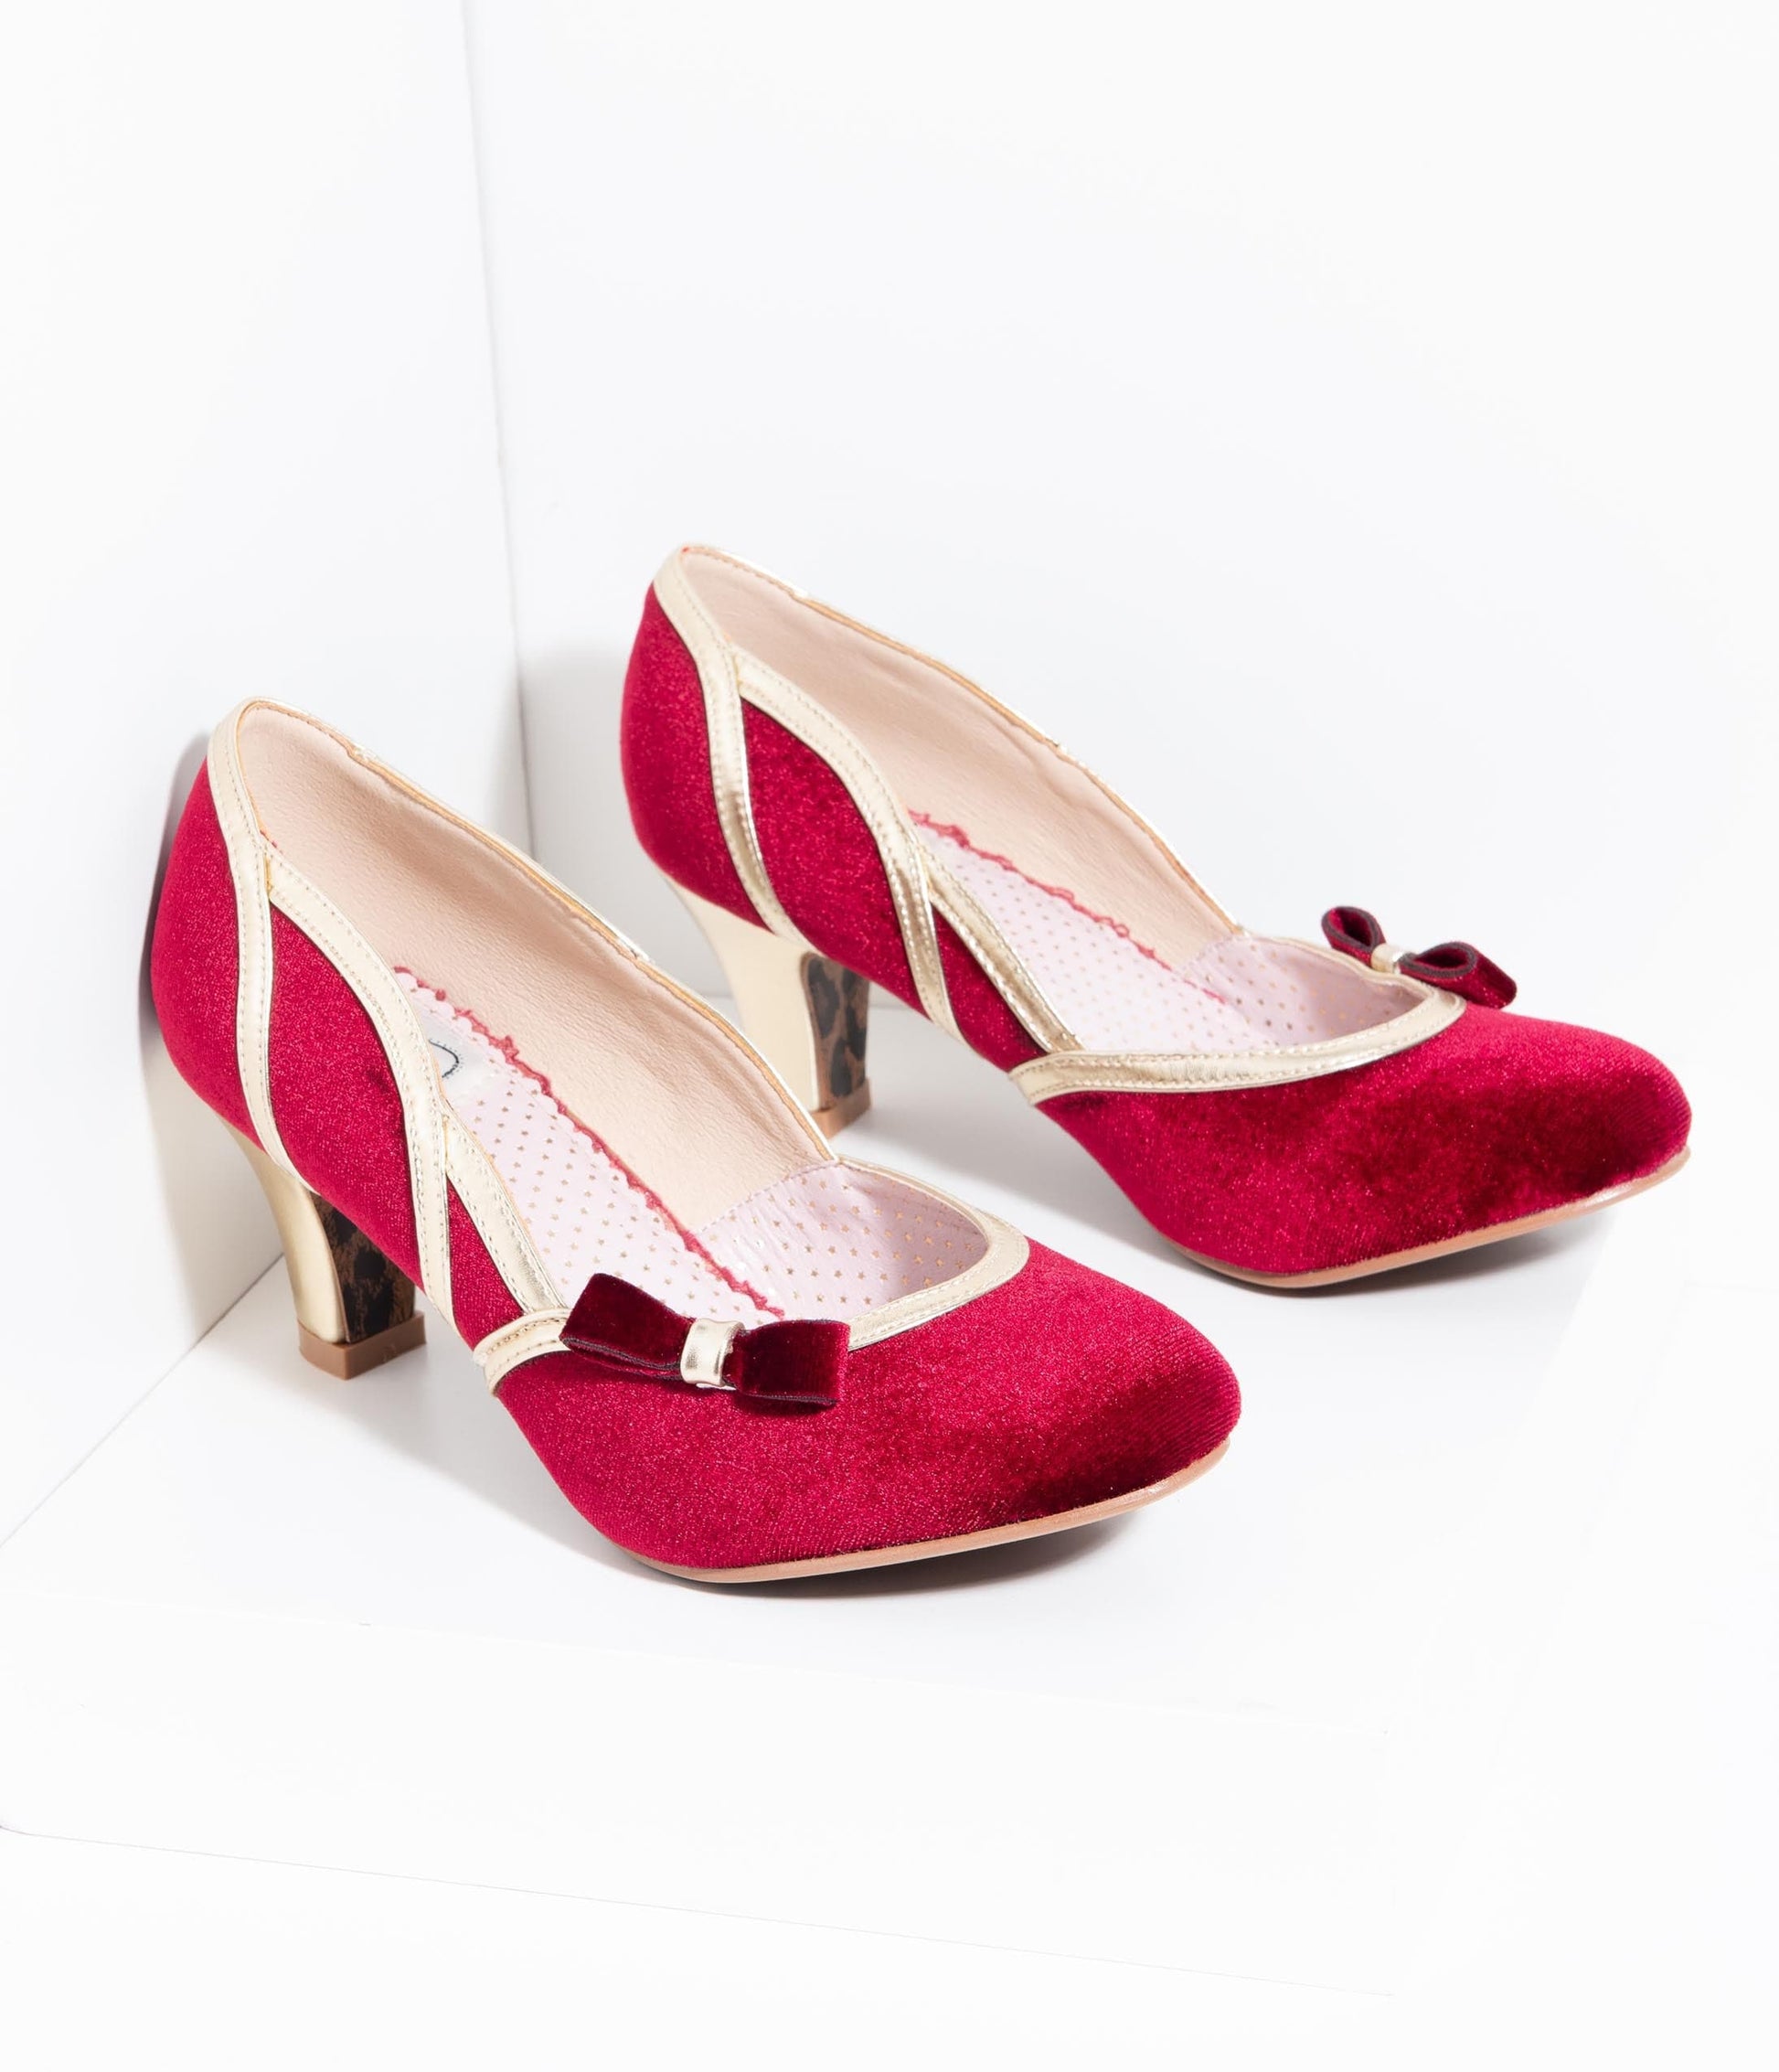 Bettie Page 1950s Style Red Suede & Gold Trim Camille Heels